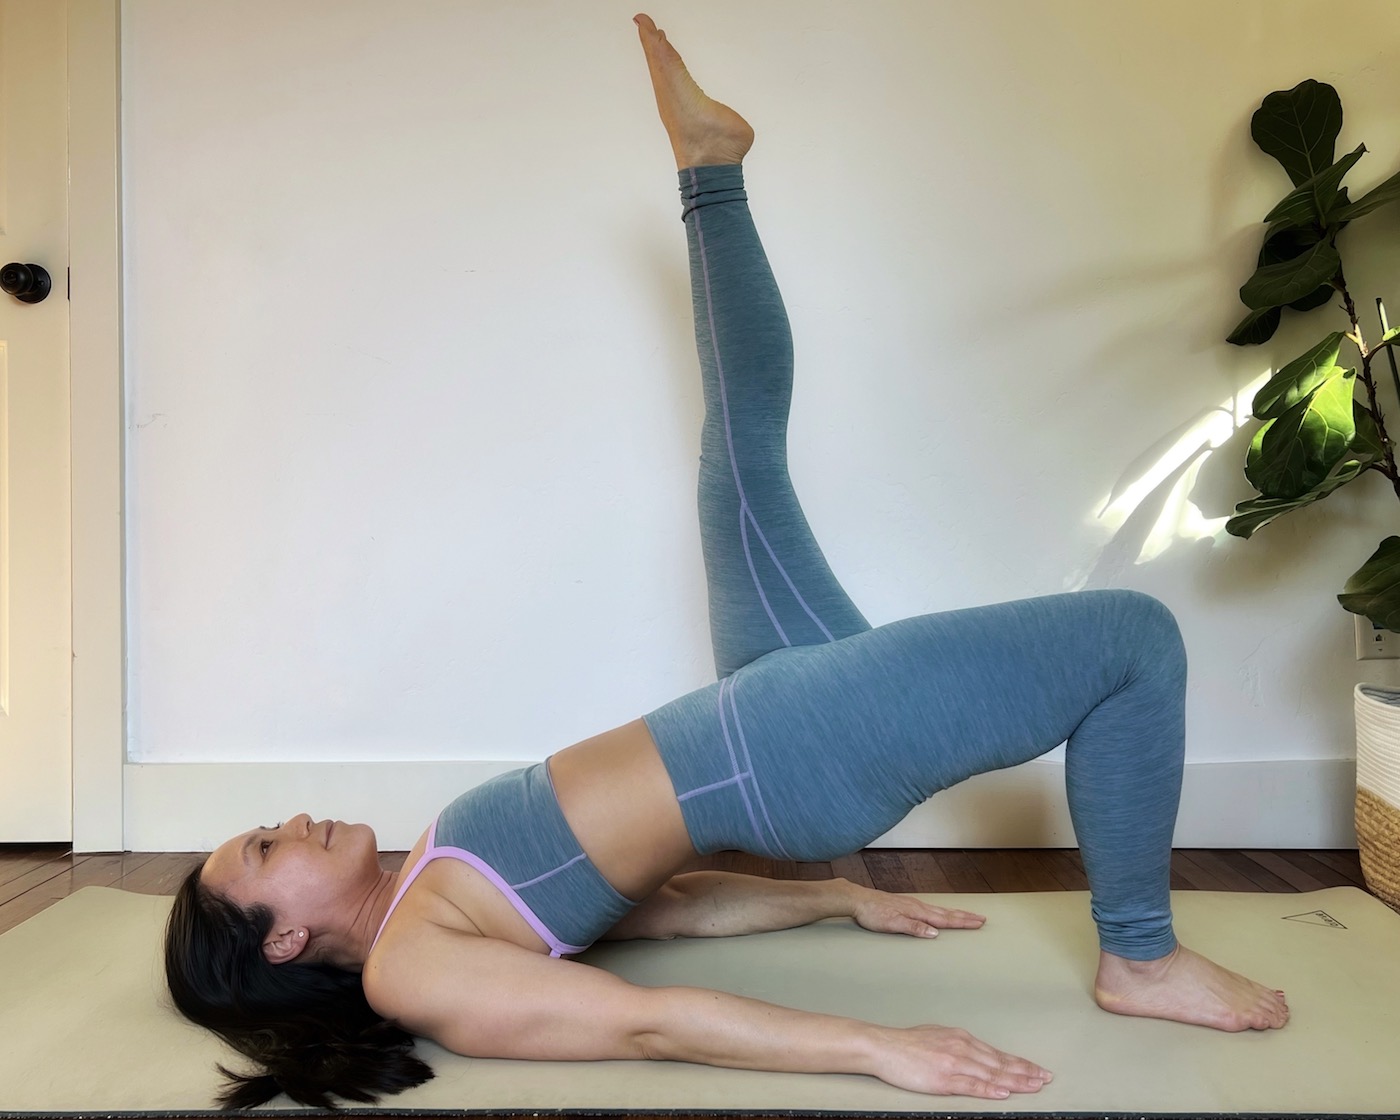 How To Do Goddess Yoga Pose - Proper Form, Variations, and Common Mistakes  - The Yoga Nomads